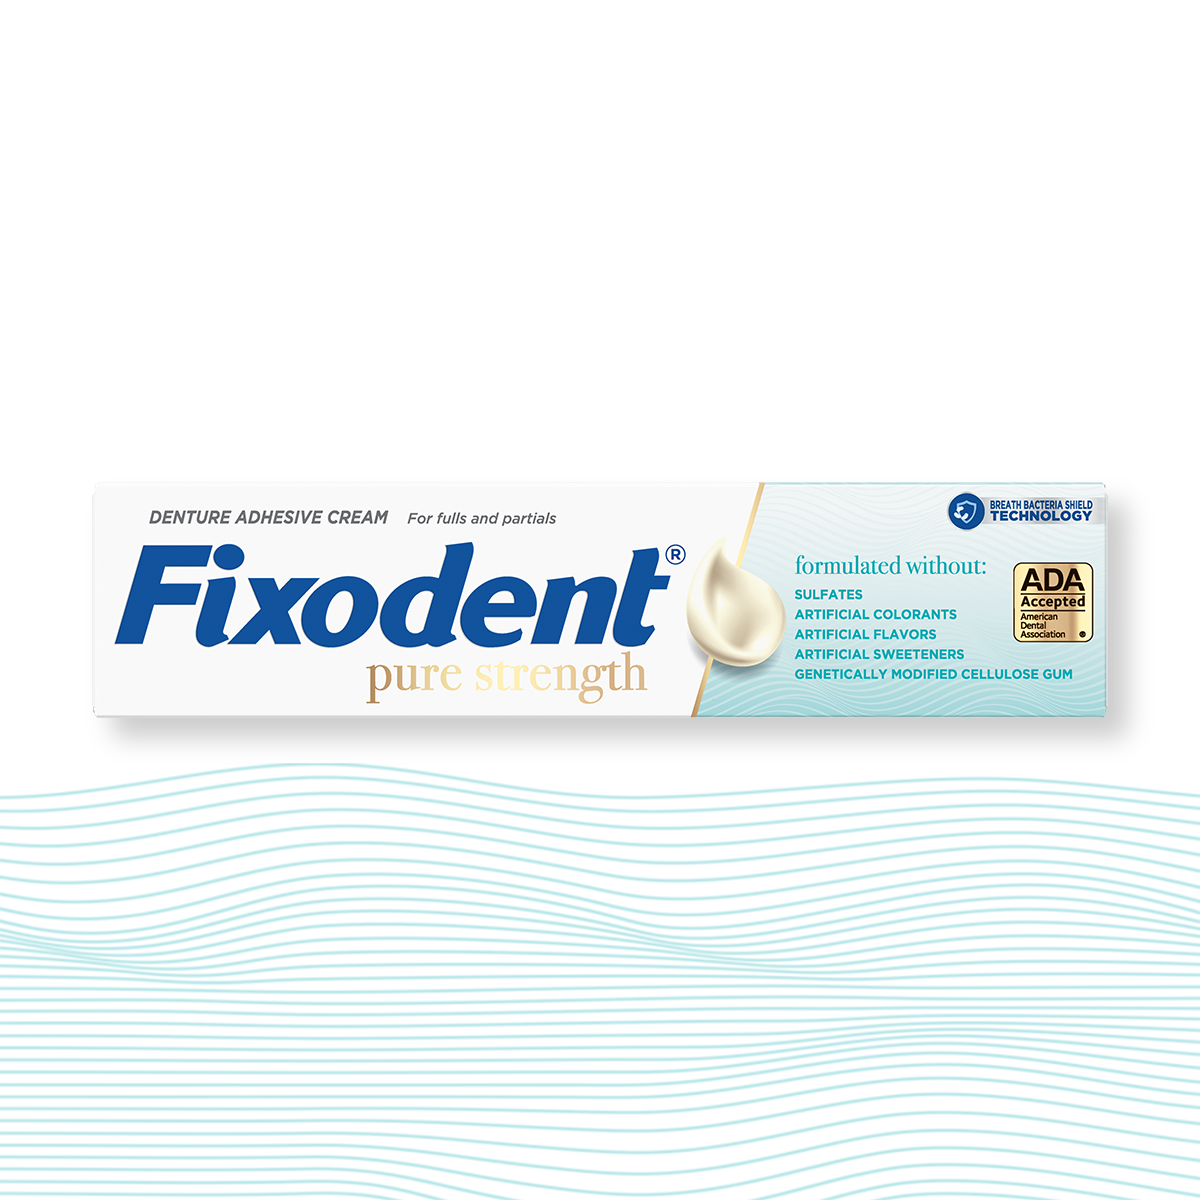 How to Remove Fixodent Denture Adhesive?